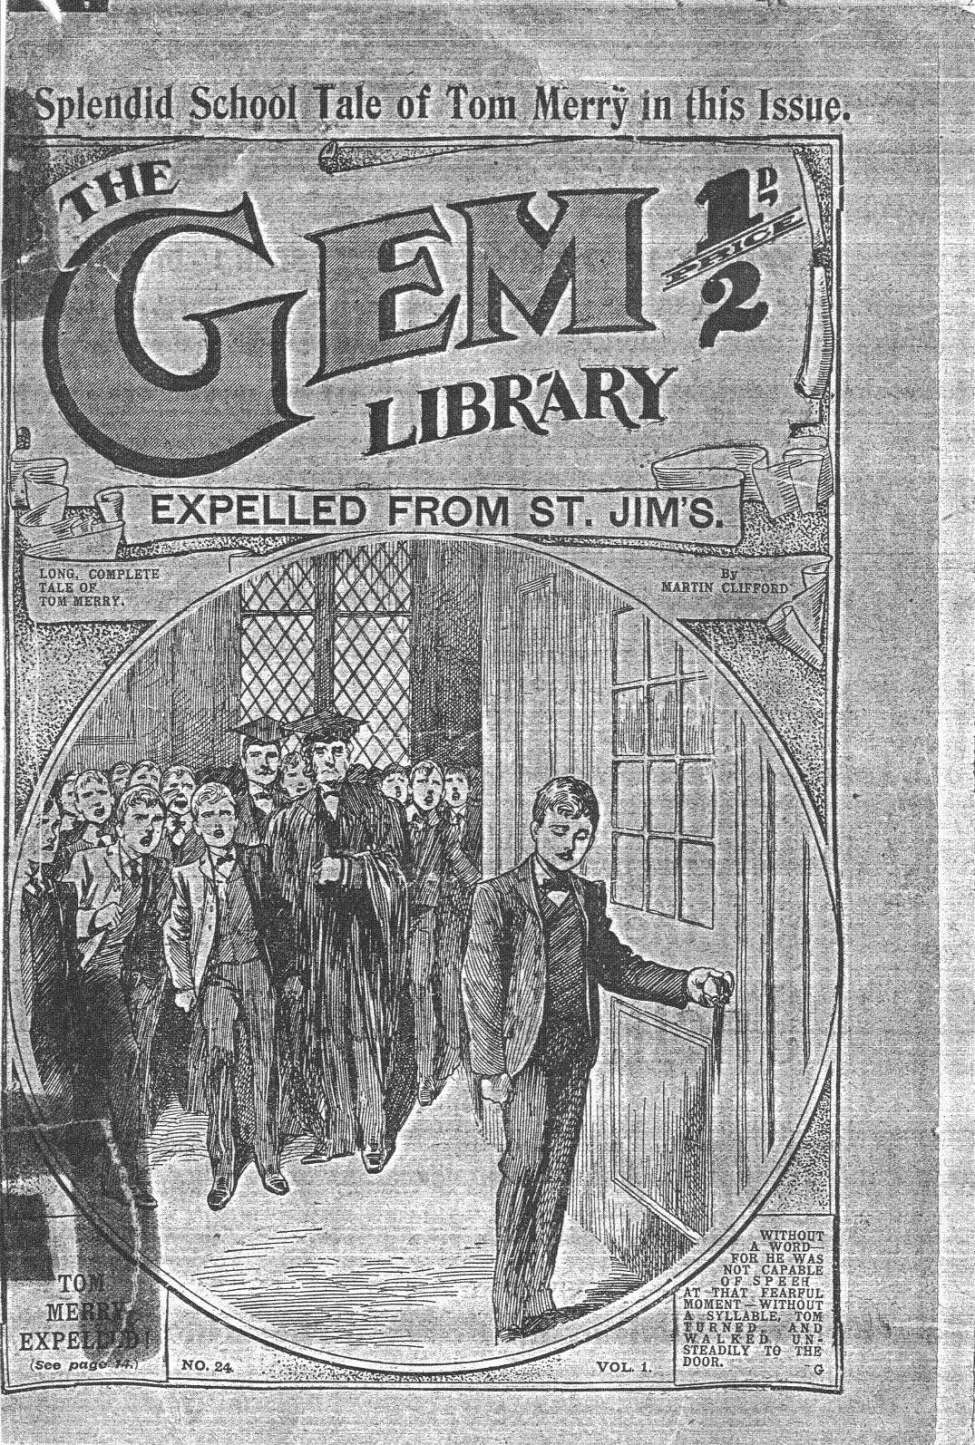 Comic Book Cover For The Gem v1 24 - Expelled From St. Jim’s